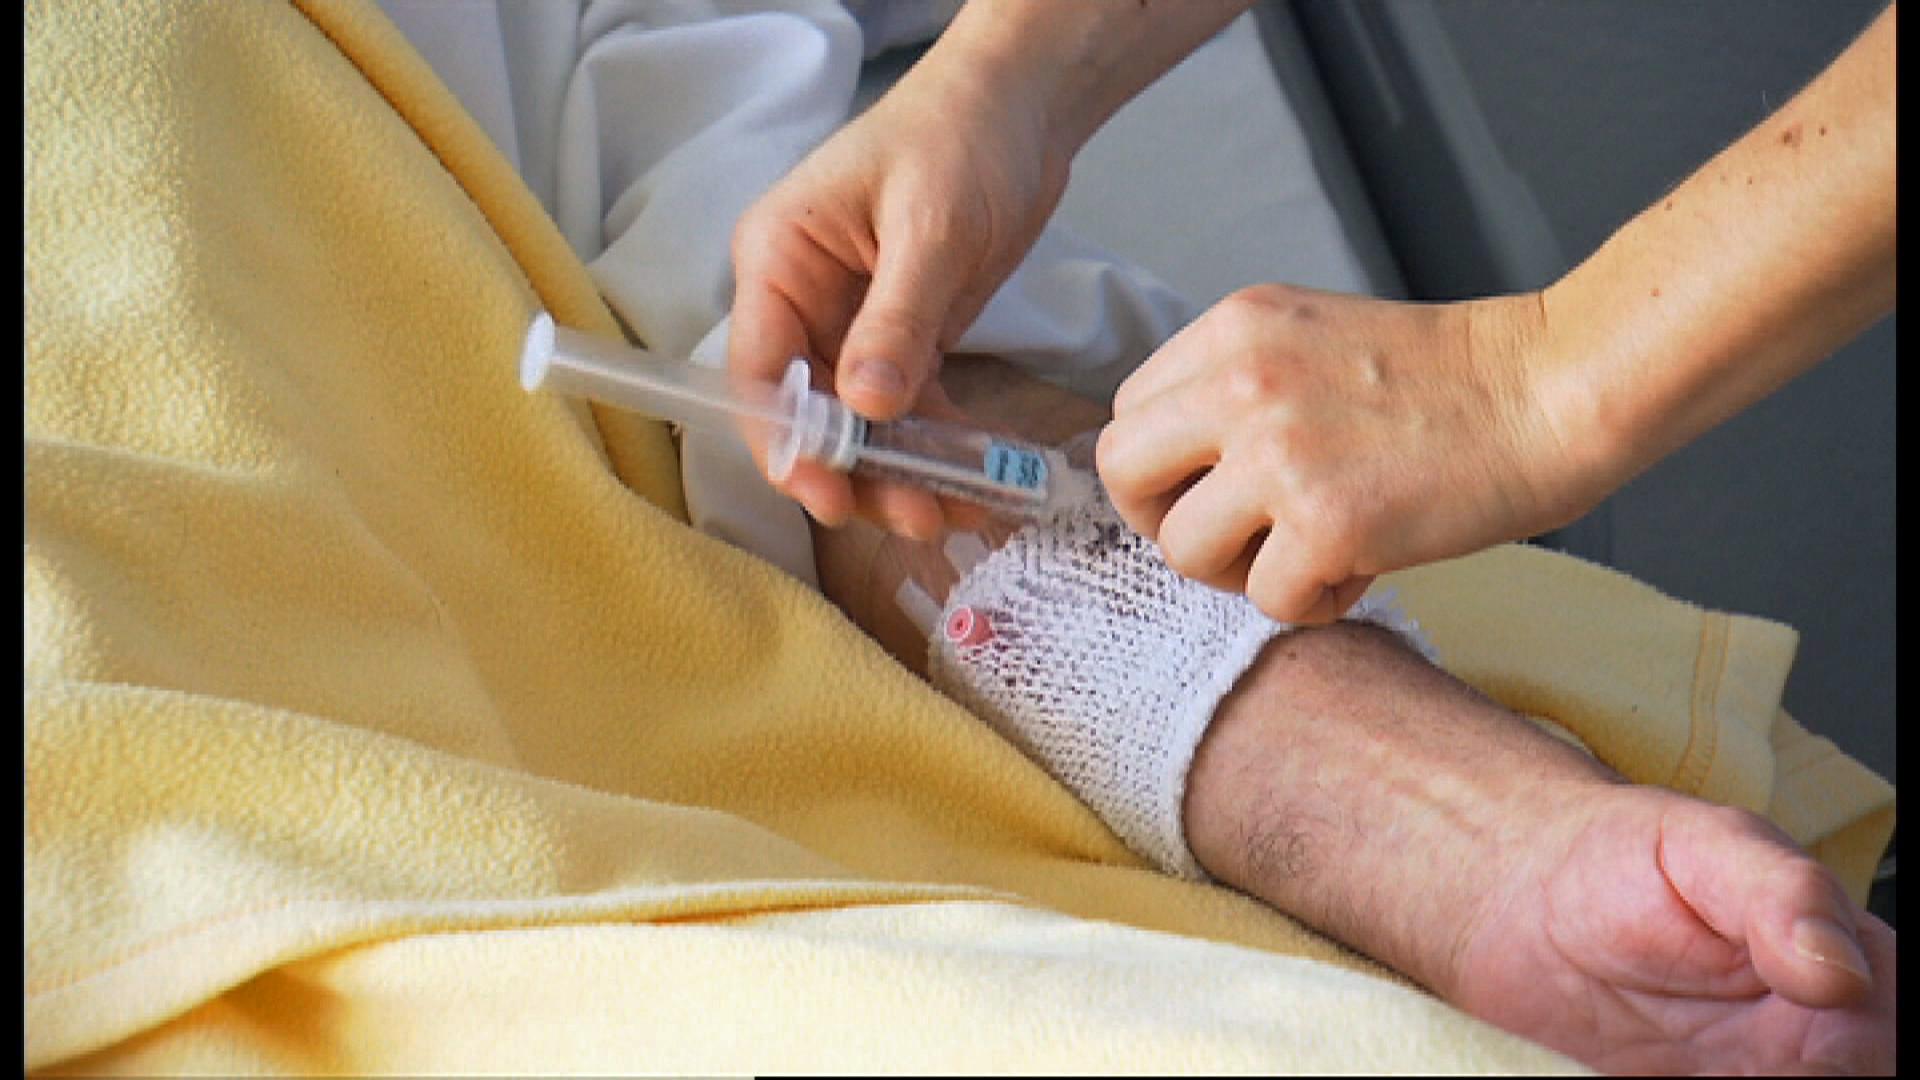 A pair of hands injecting a syringe into the forearm of an older person.